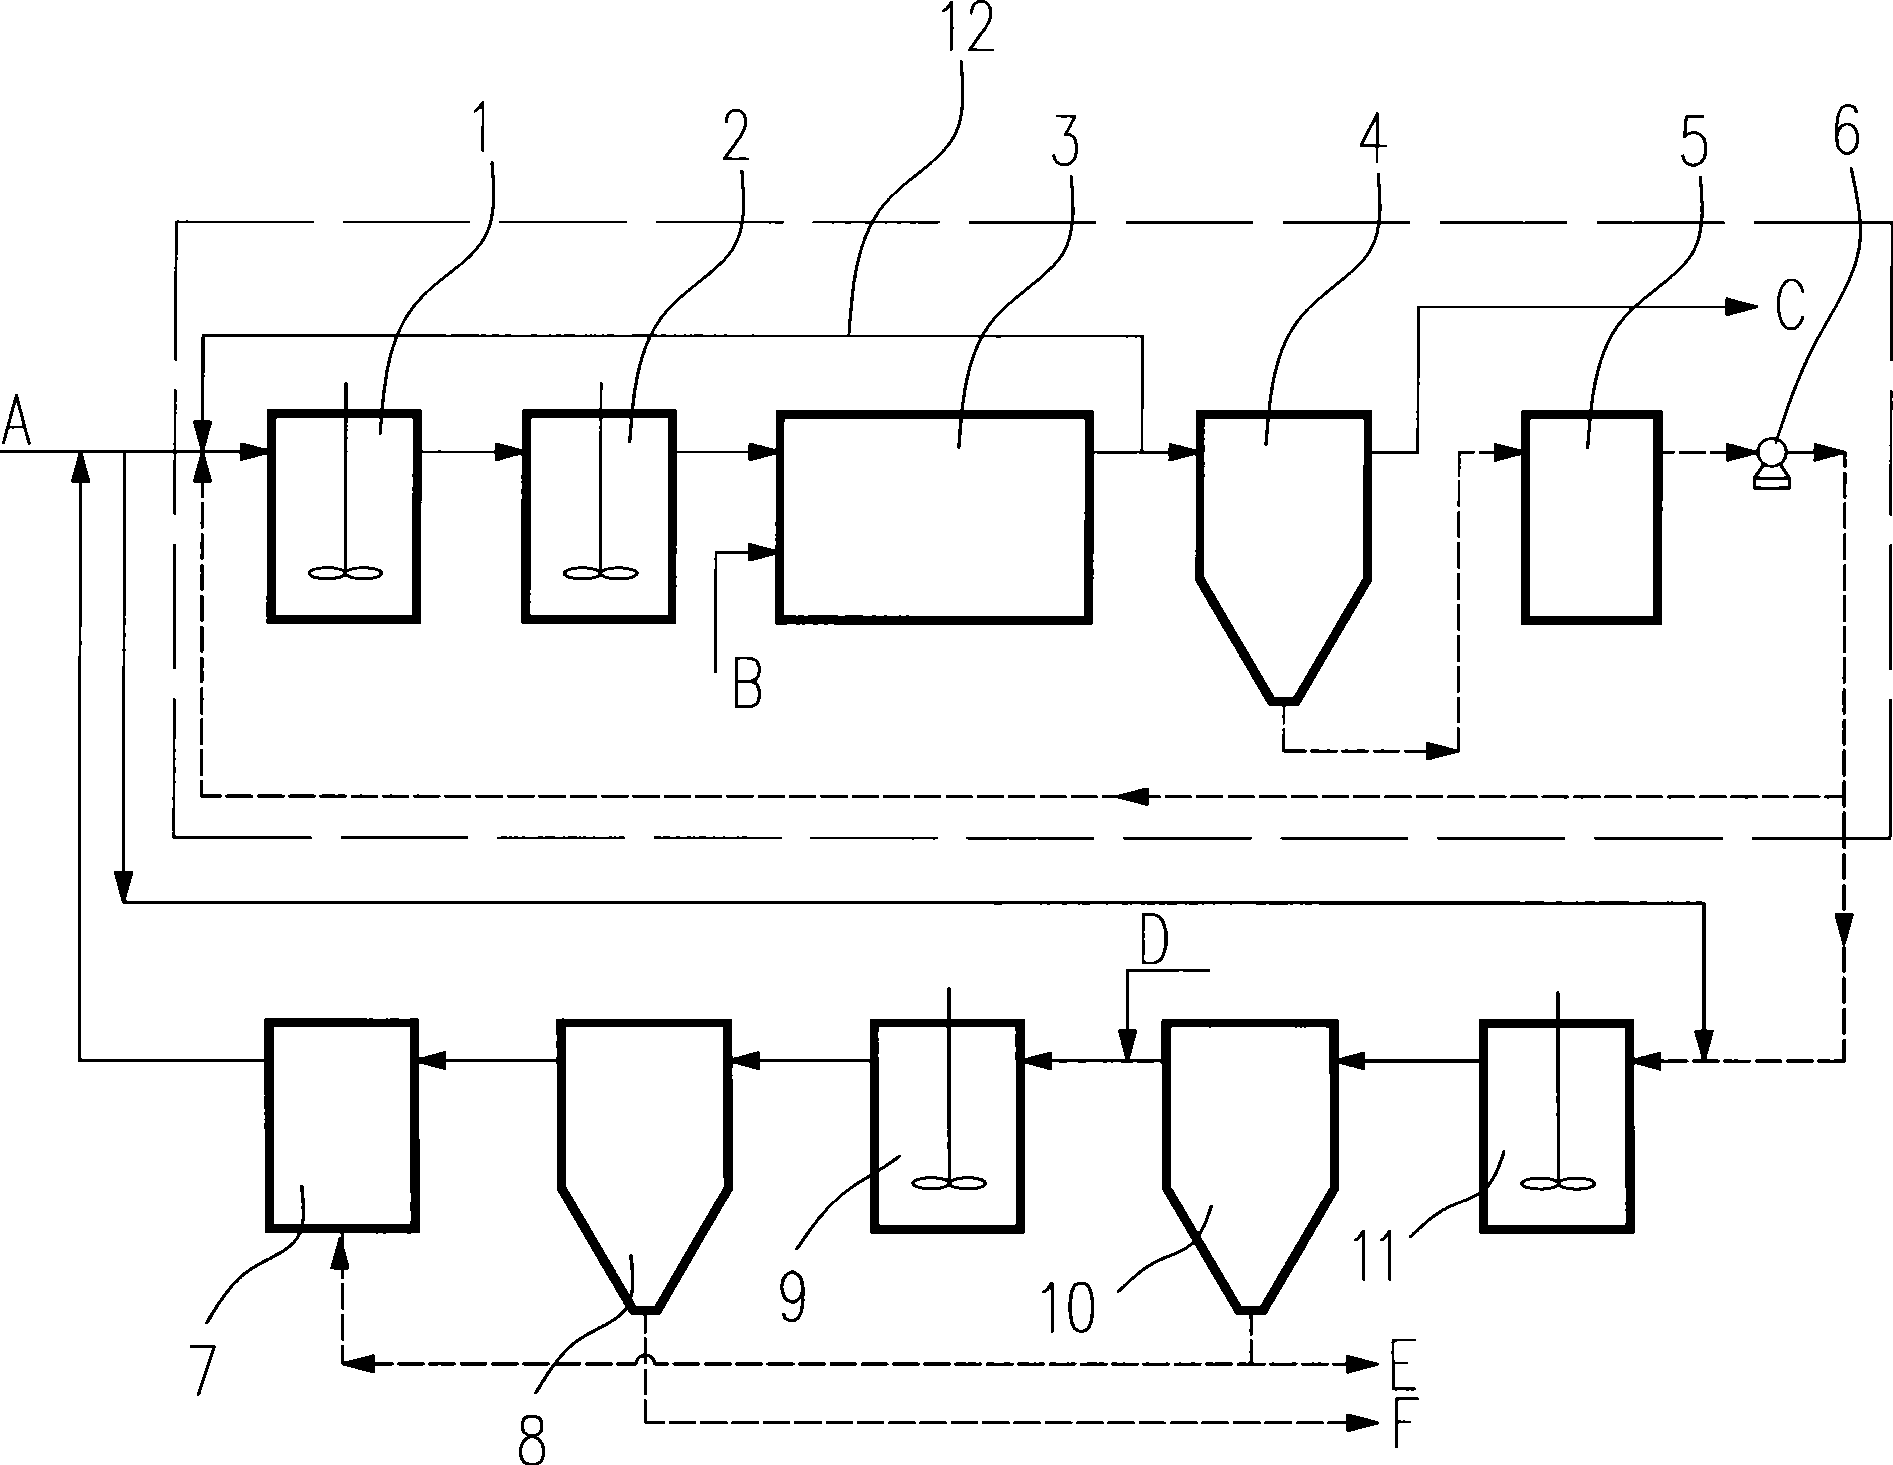 Sewage disposal system with biological phosphorus removal and chemical phosphorus removal bypass and disposal method